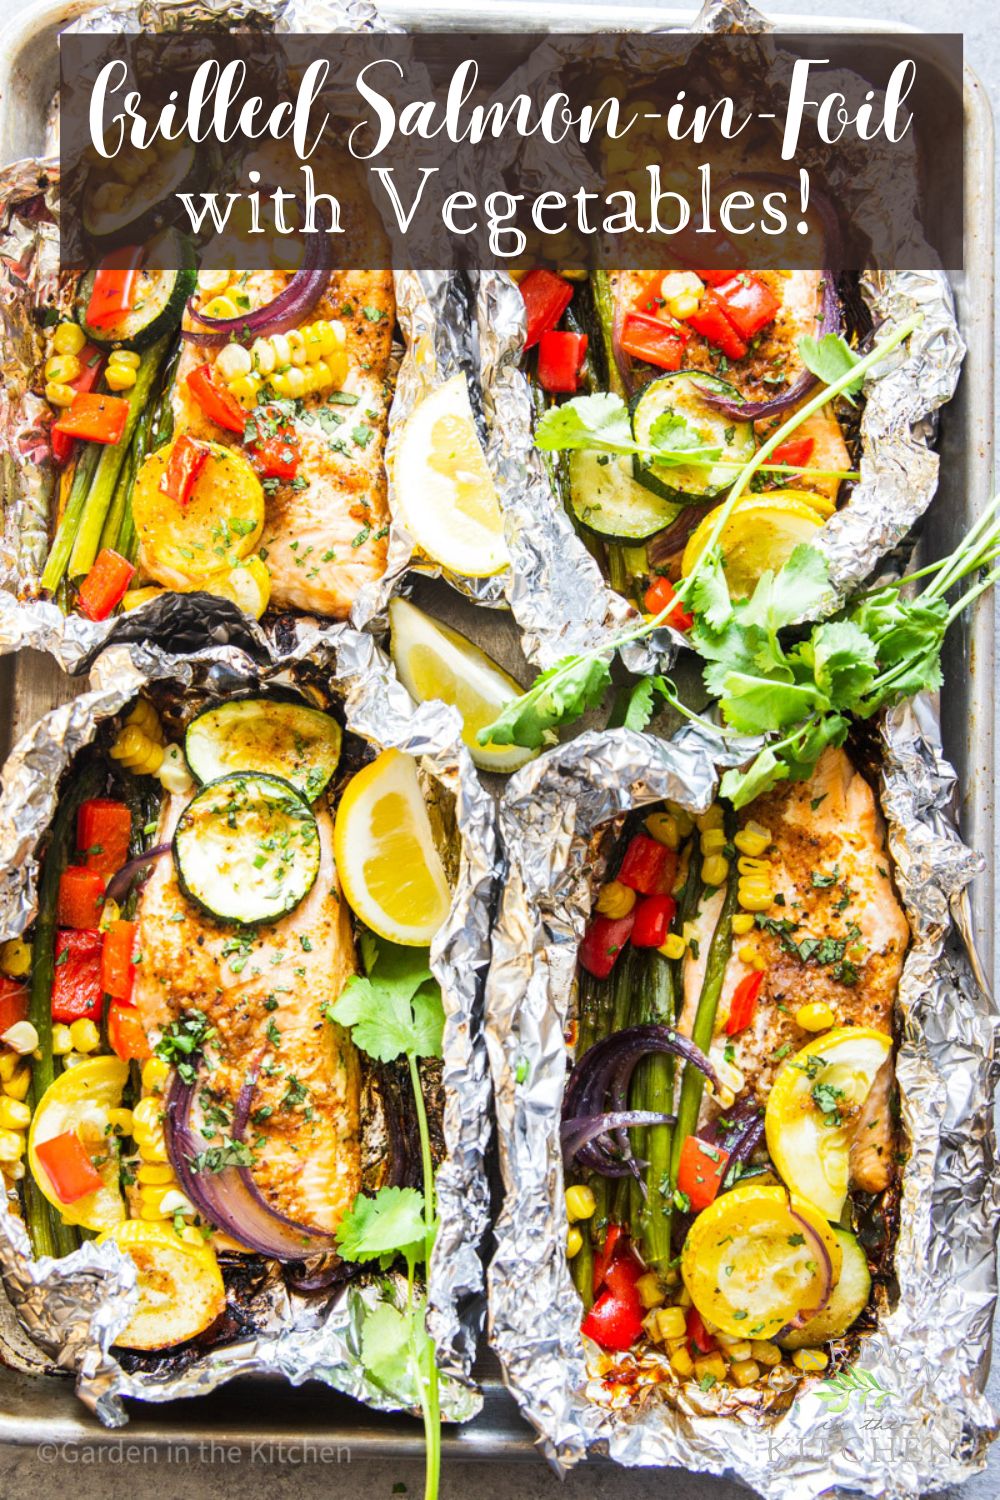 Grille salmon, corn, red bell peppers, zucchini, summer squash, asparagus, lemons and cilantro in foil.